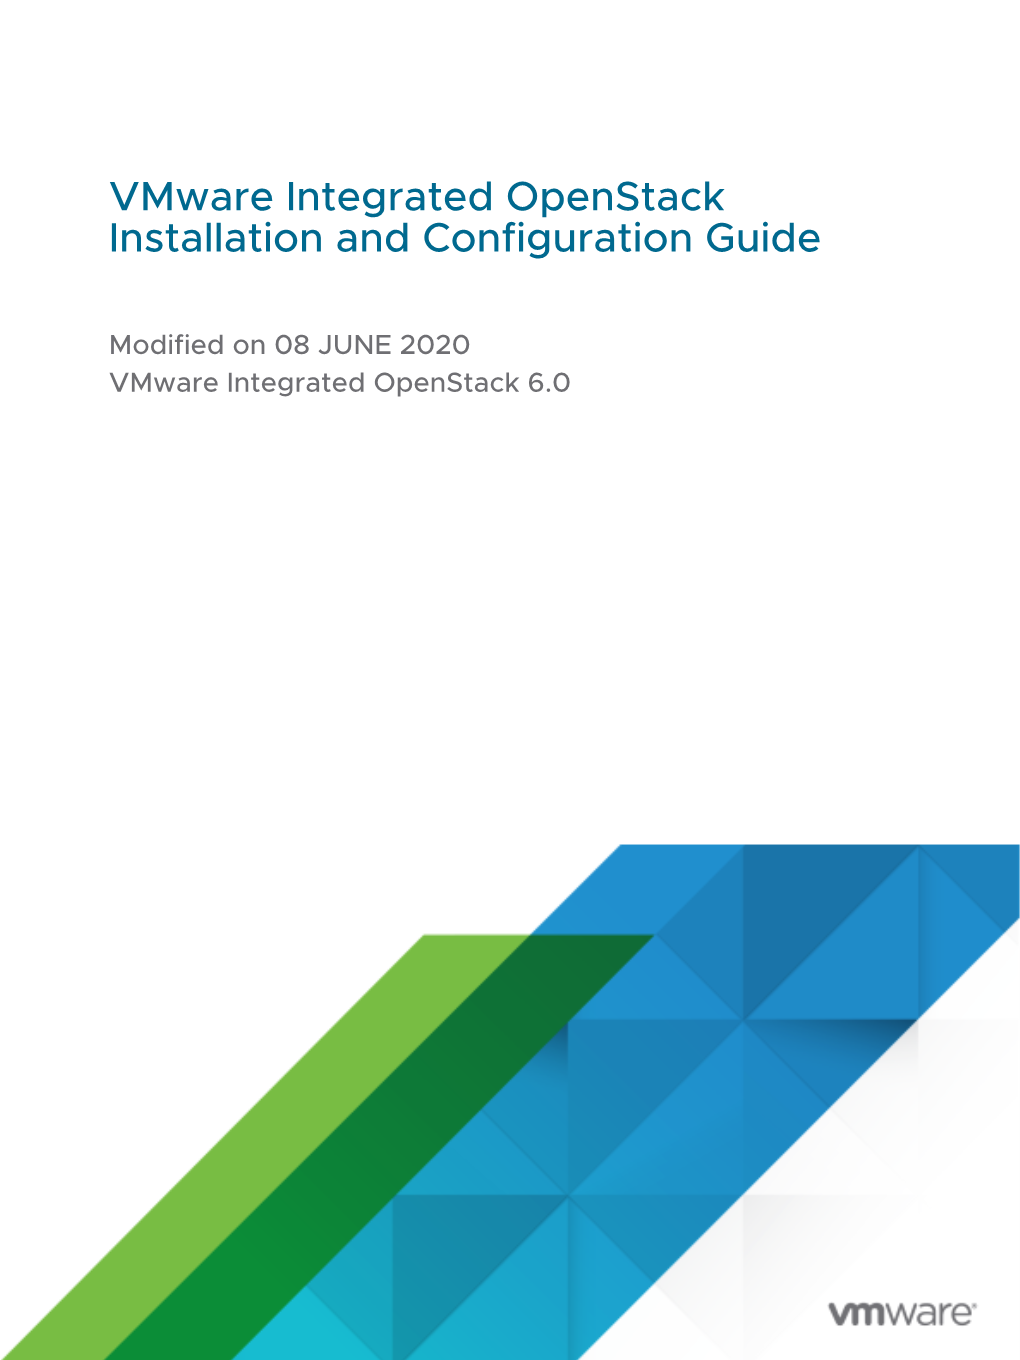 Vmware Integrated Openstack Installation and Configuration Guide